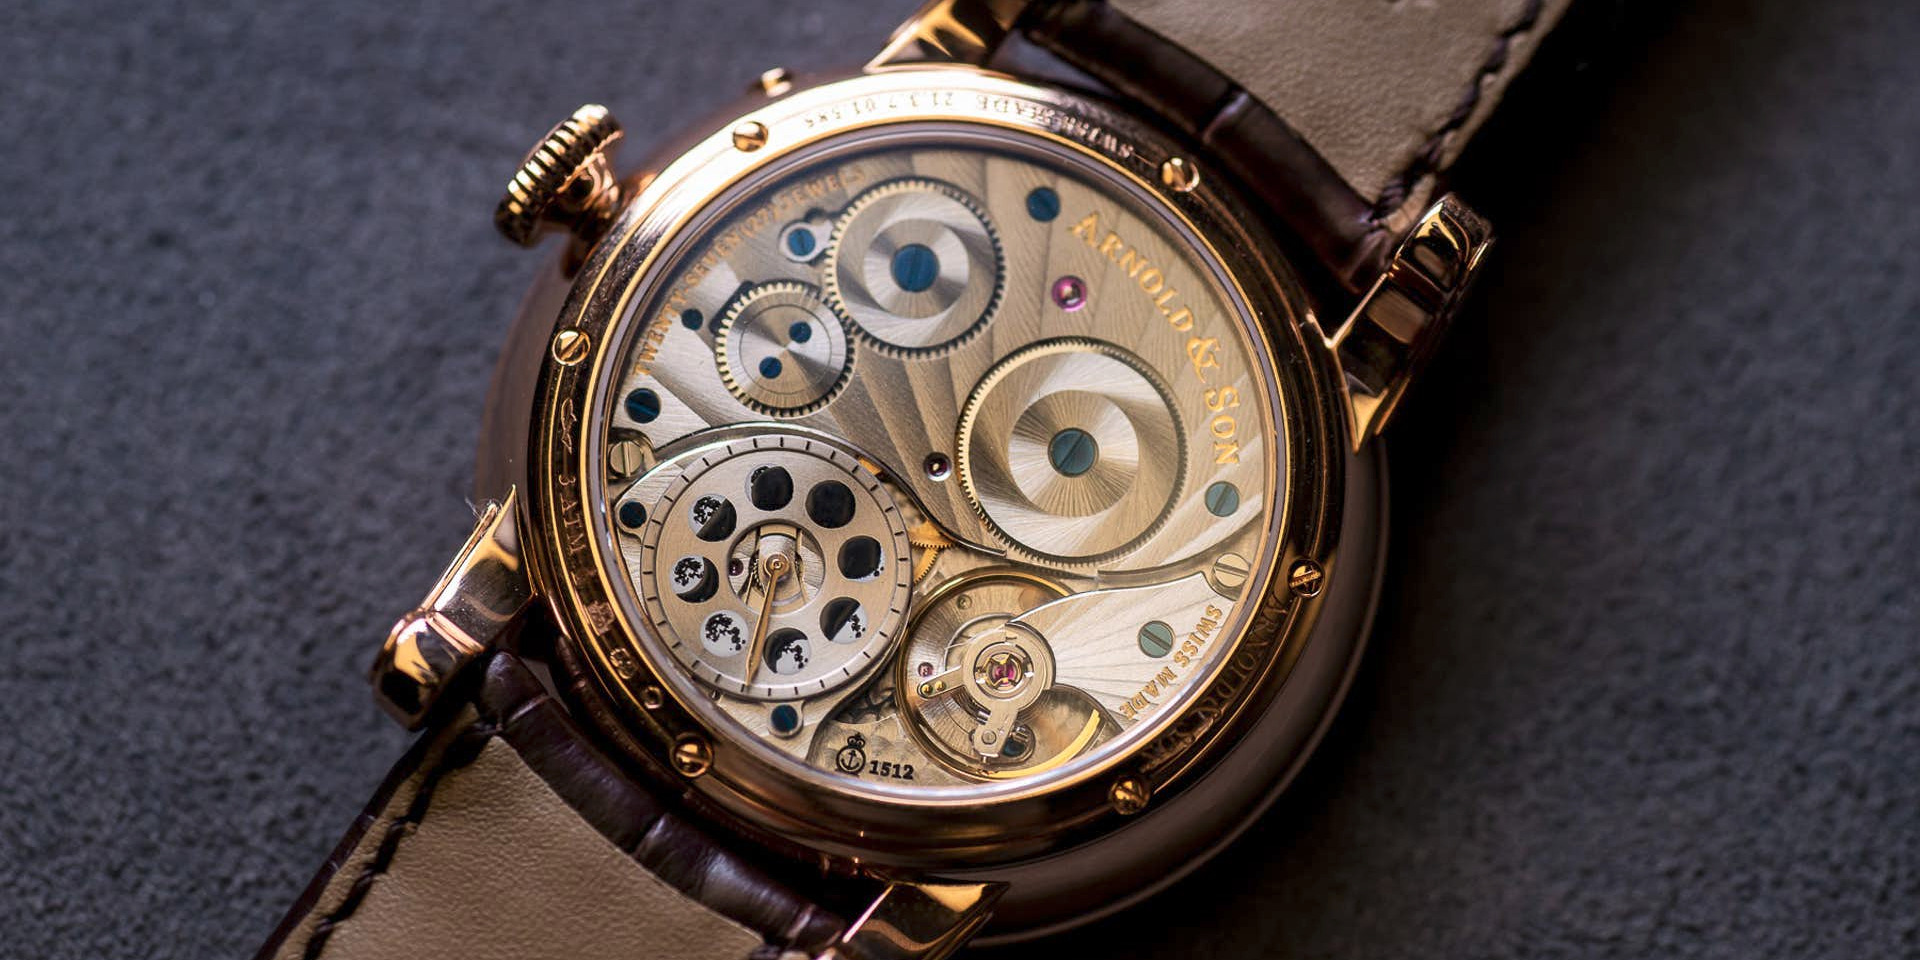 Arnold & Son at Baselworld 2019: Brilliance in transition